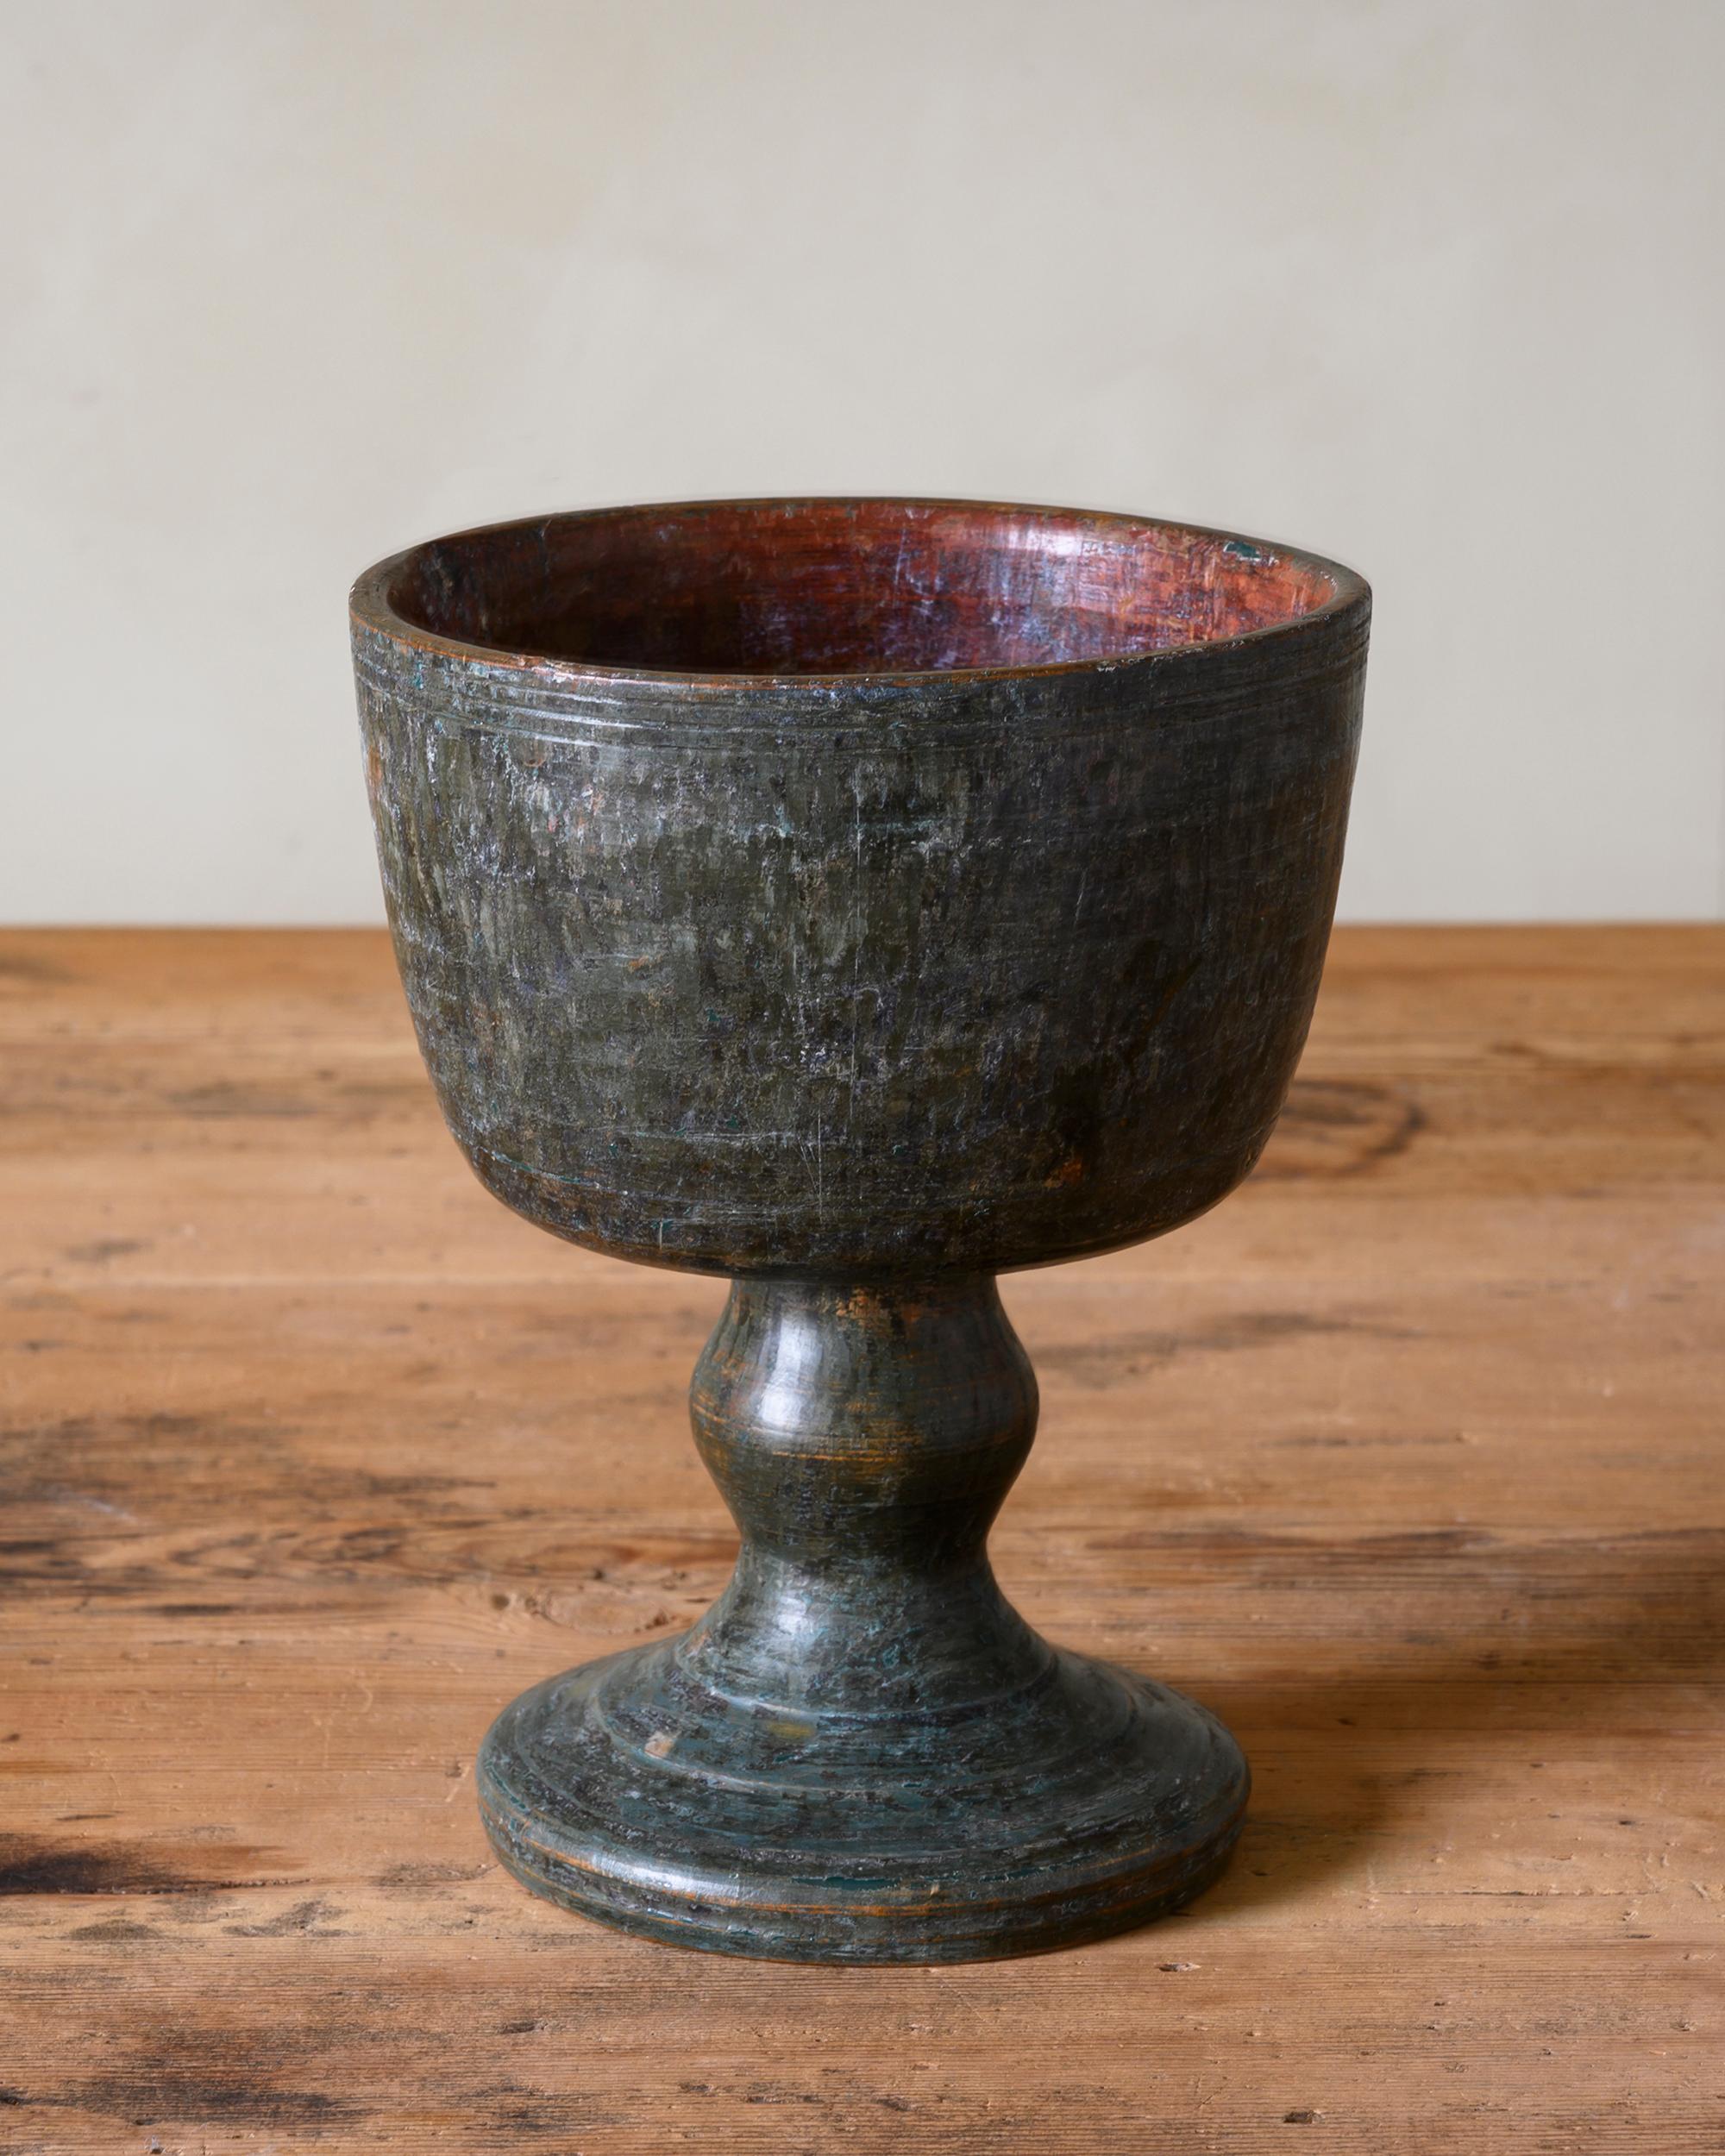 Unusually large and rare 18th century Swedish turned wooden treen goblet in it's original finish.